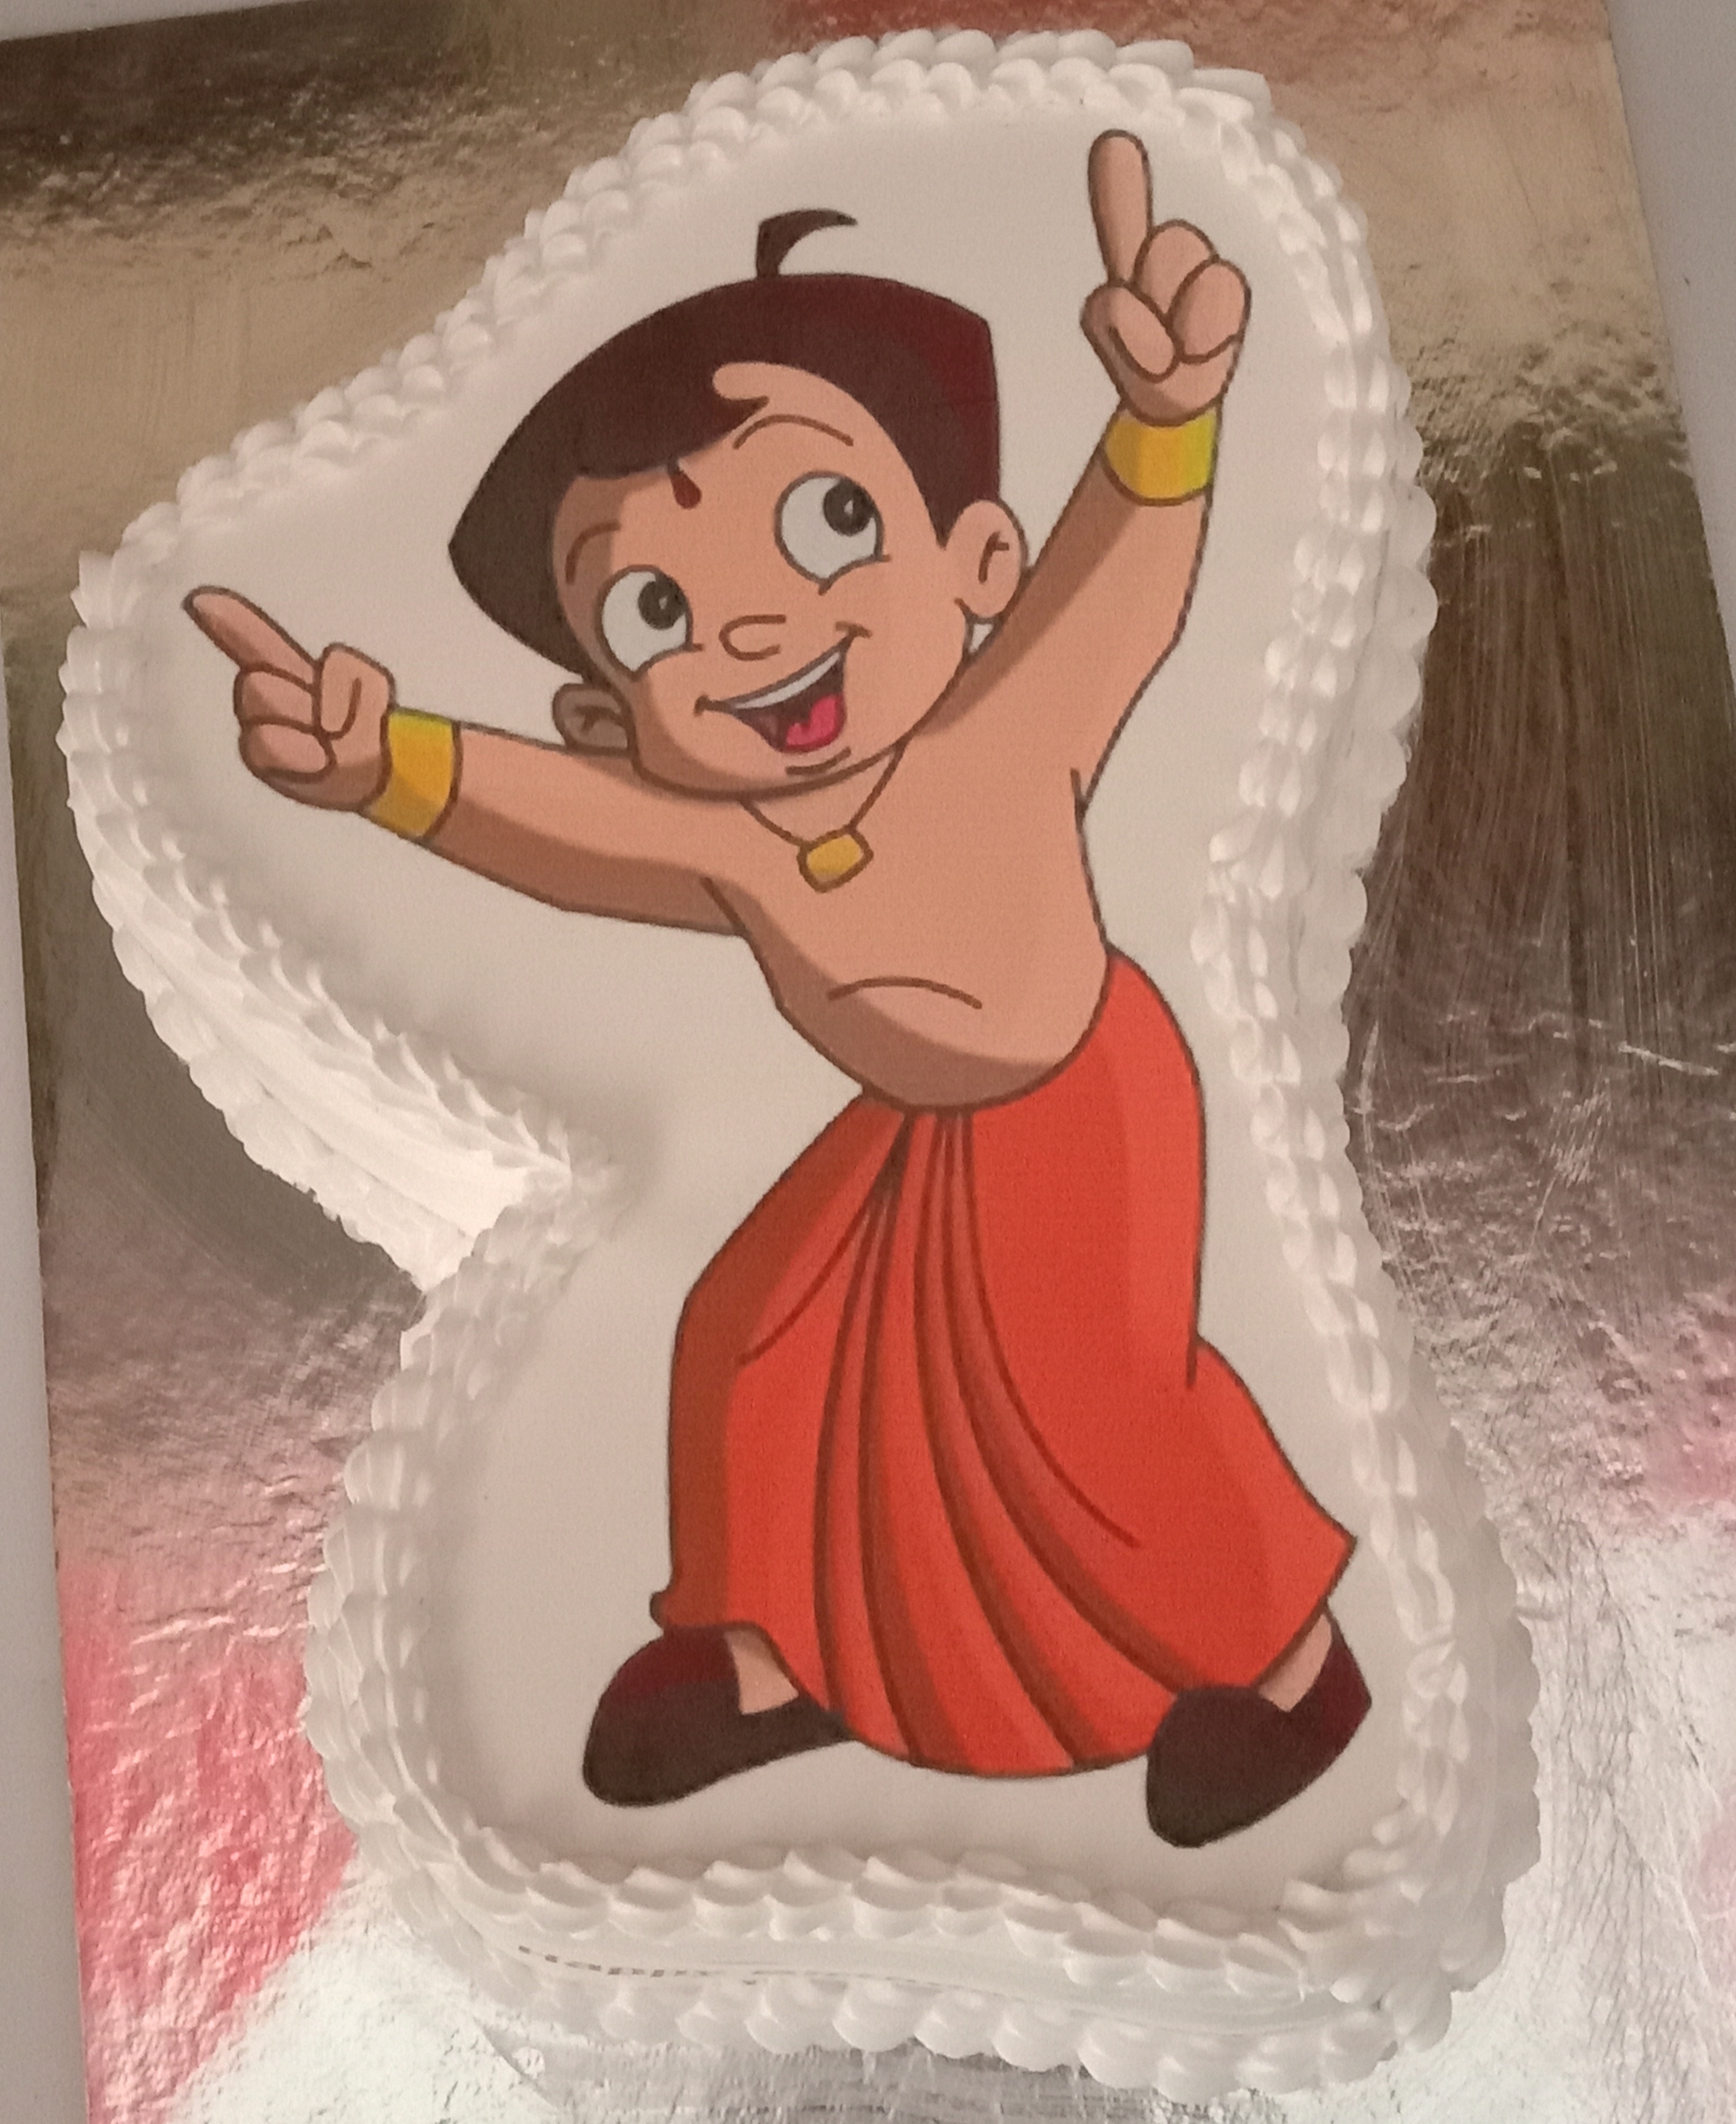 Chota Bheem Cutout Pineapple Cake Delivery in Delhi NCR - ₹1, Cake  Express